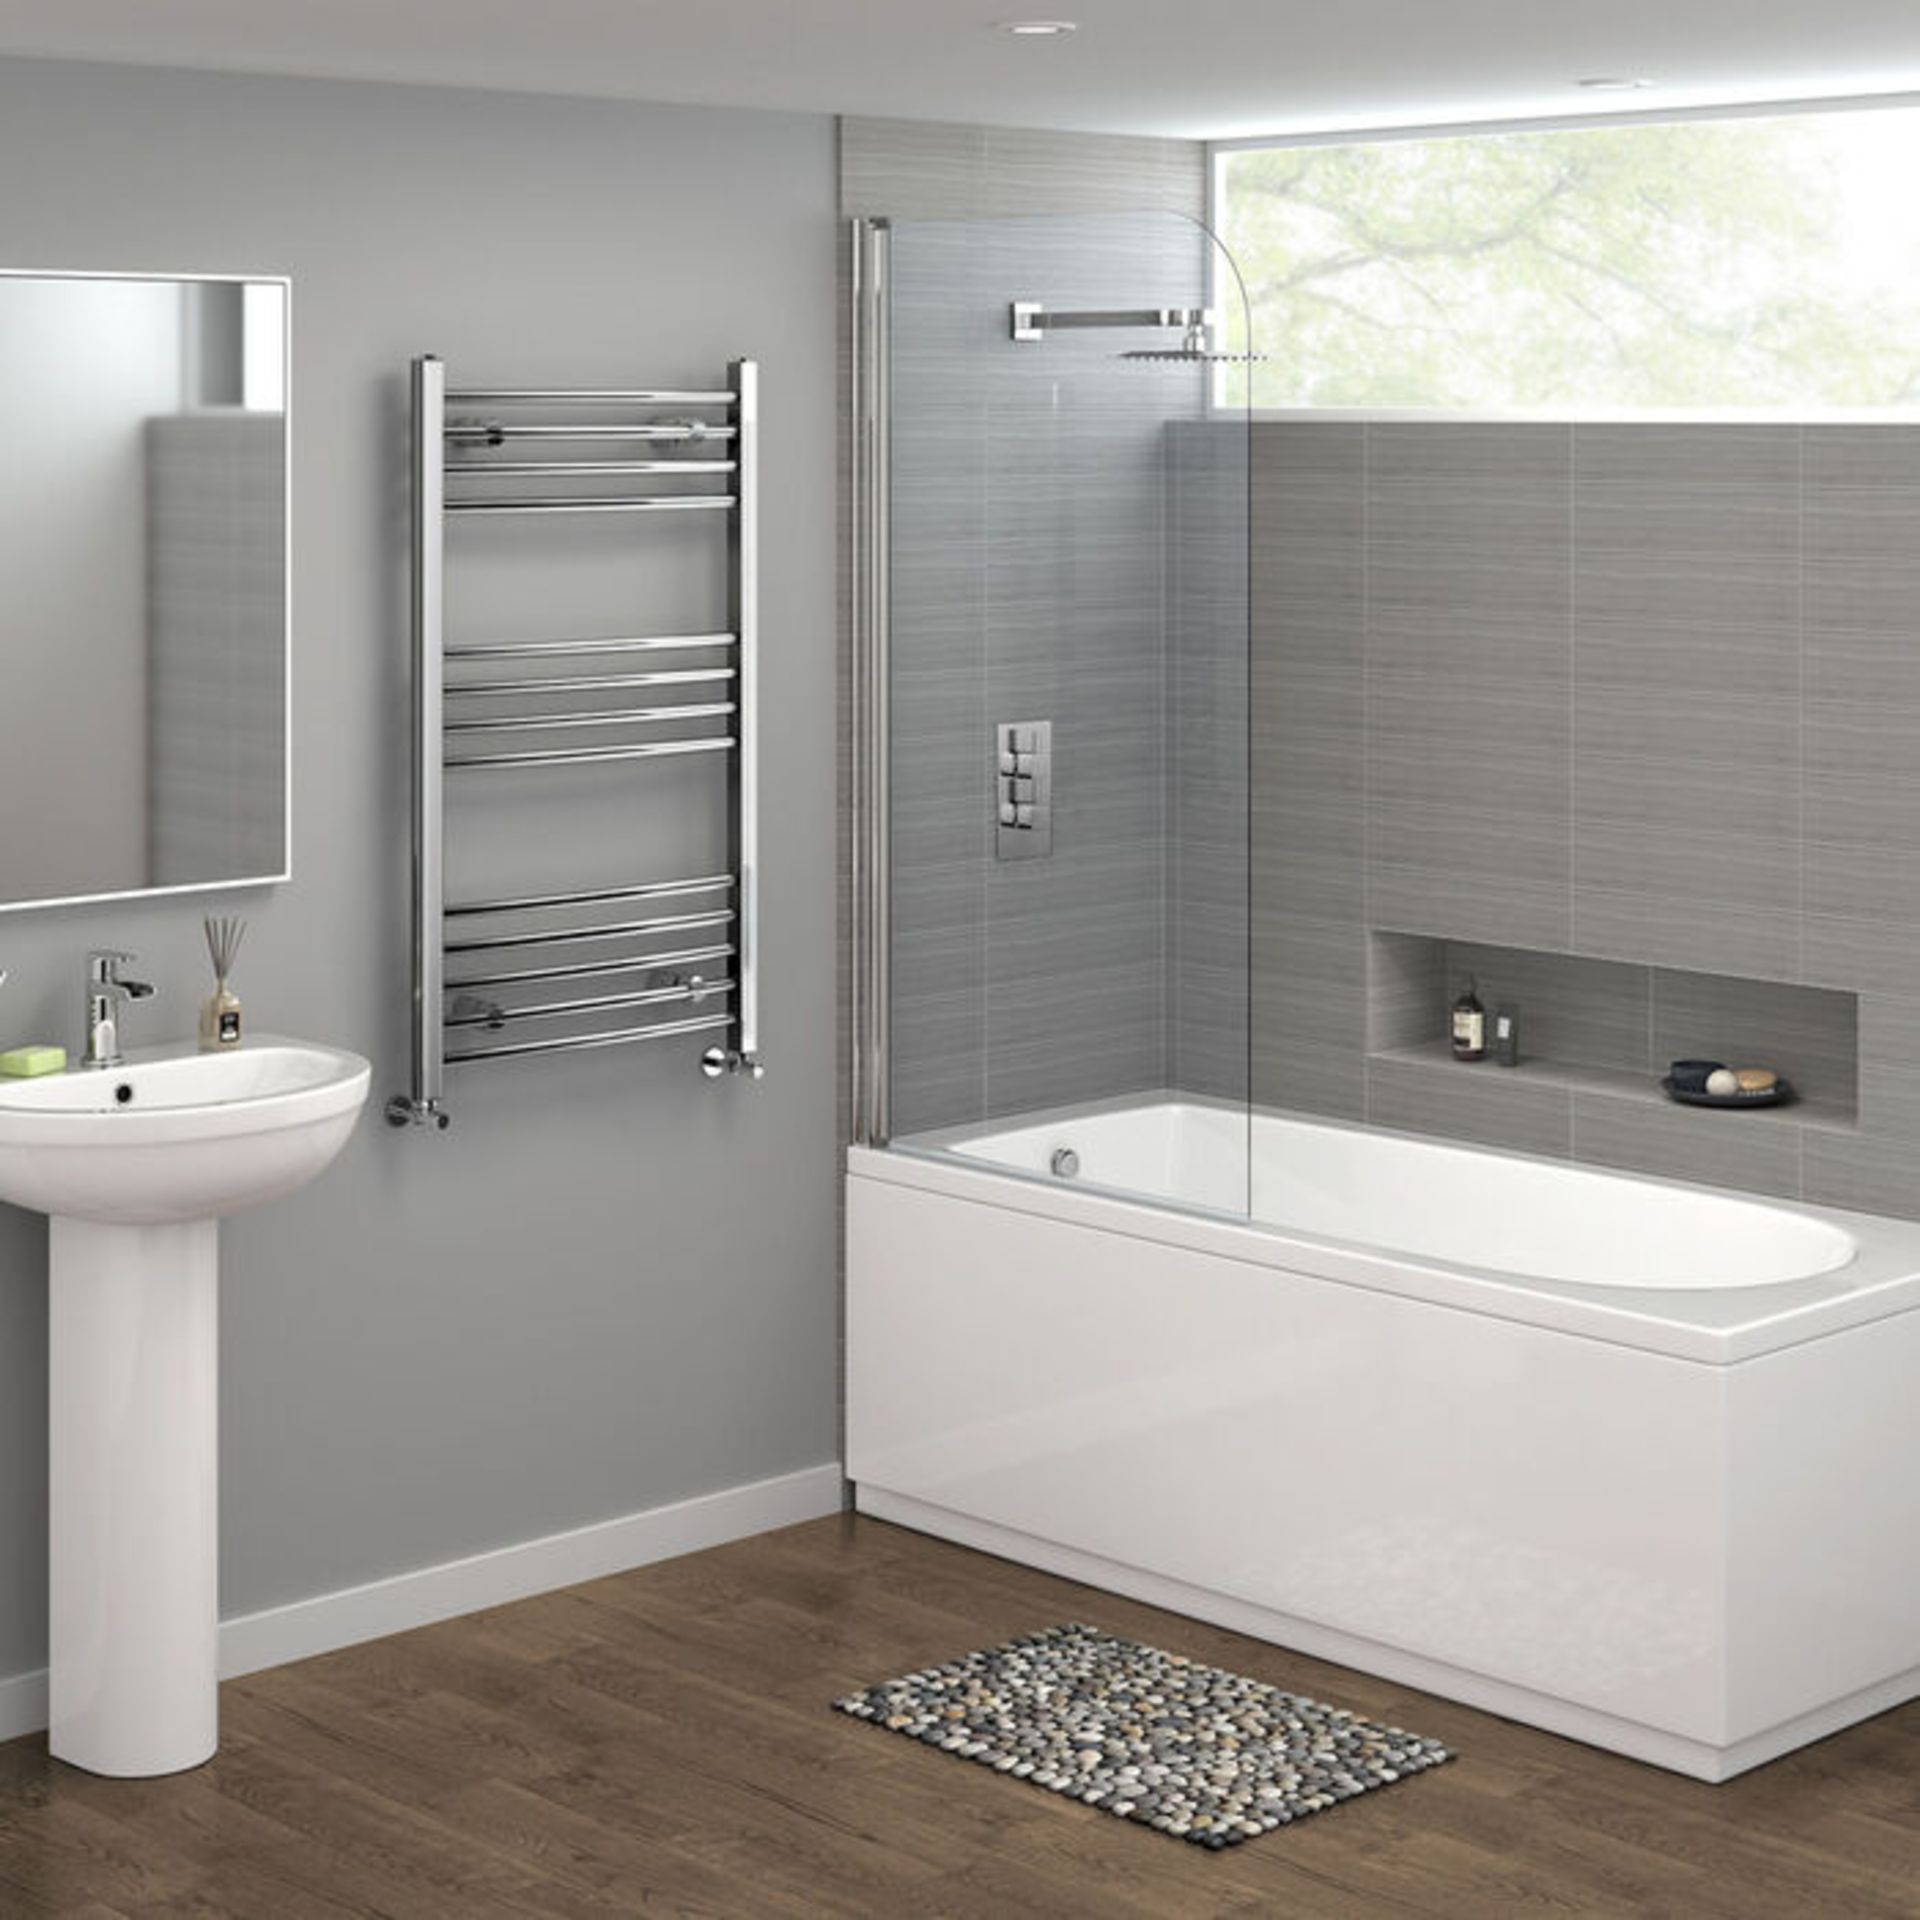 (CP47) 1000x600mm - 20mm Tubes - Chrome Curved Rail Ladder Towel Radiator. Our Nancy 1000x600m... - Image 2 of 3